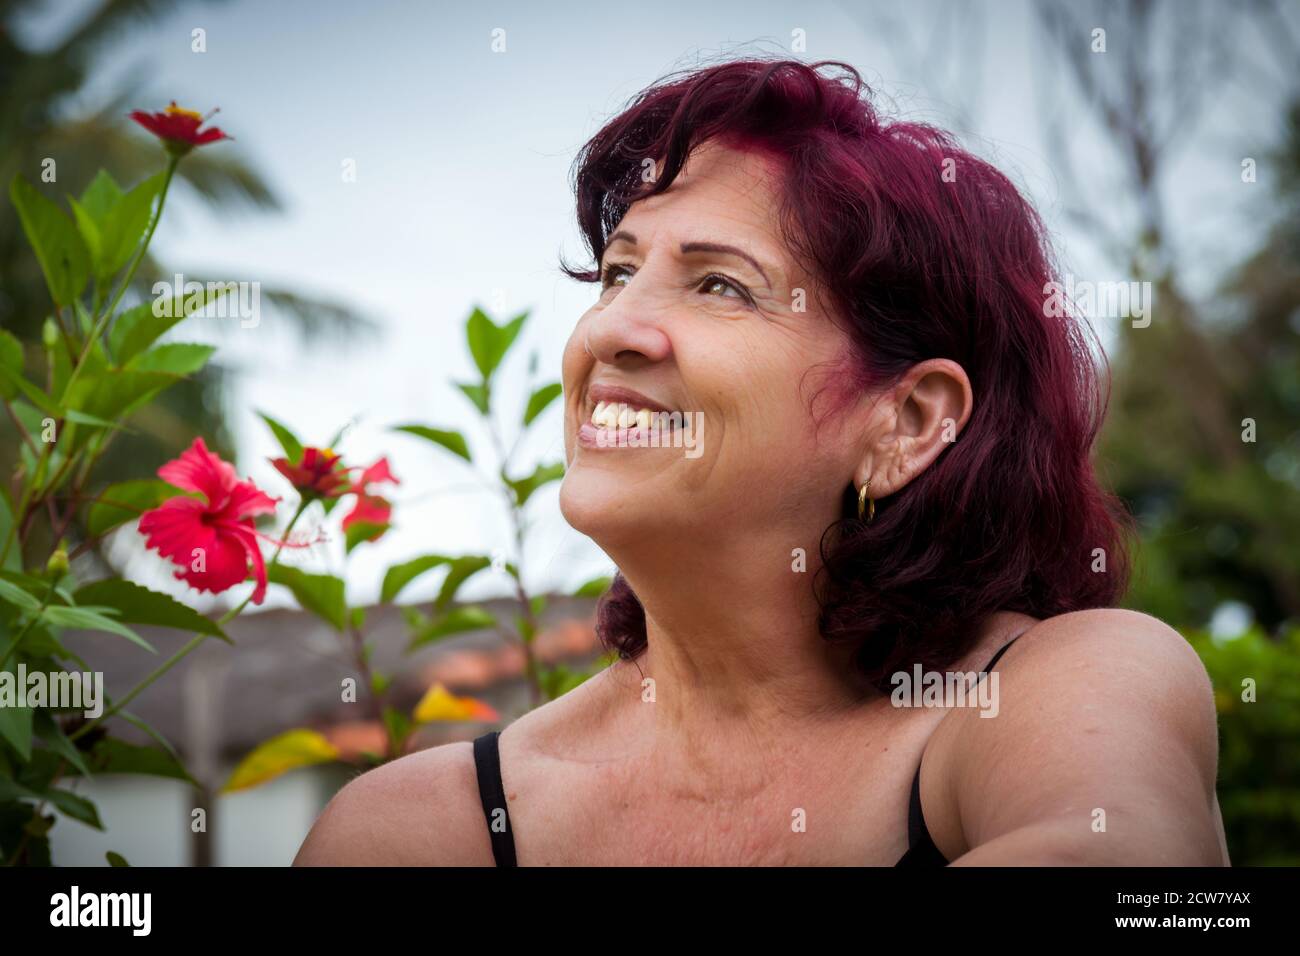 Portrait of a beautiful middle age latin woman outdoors in the garden with her hair just dyed in a redish color Stock Photo